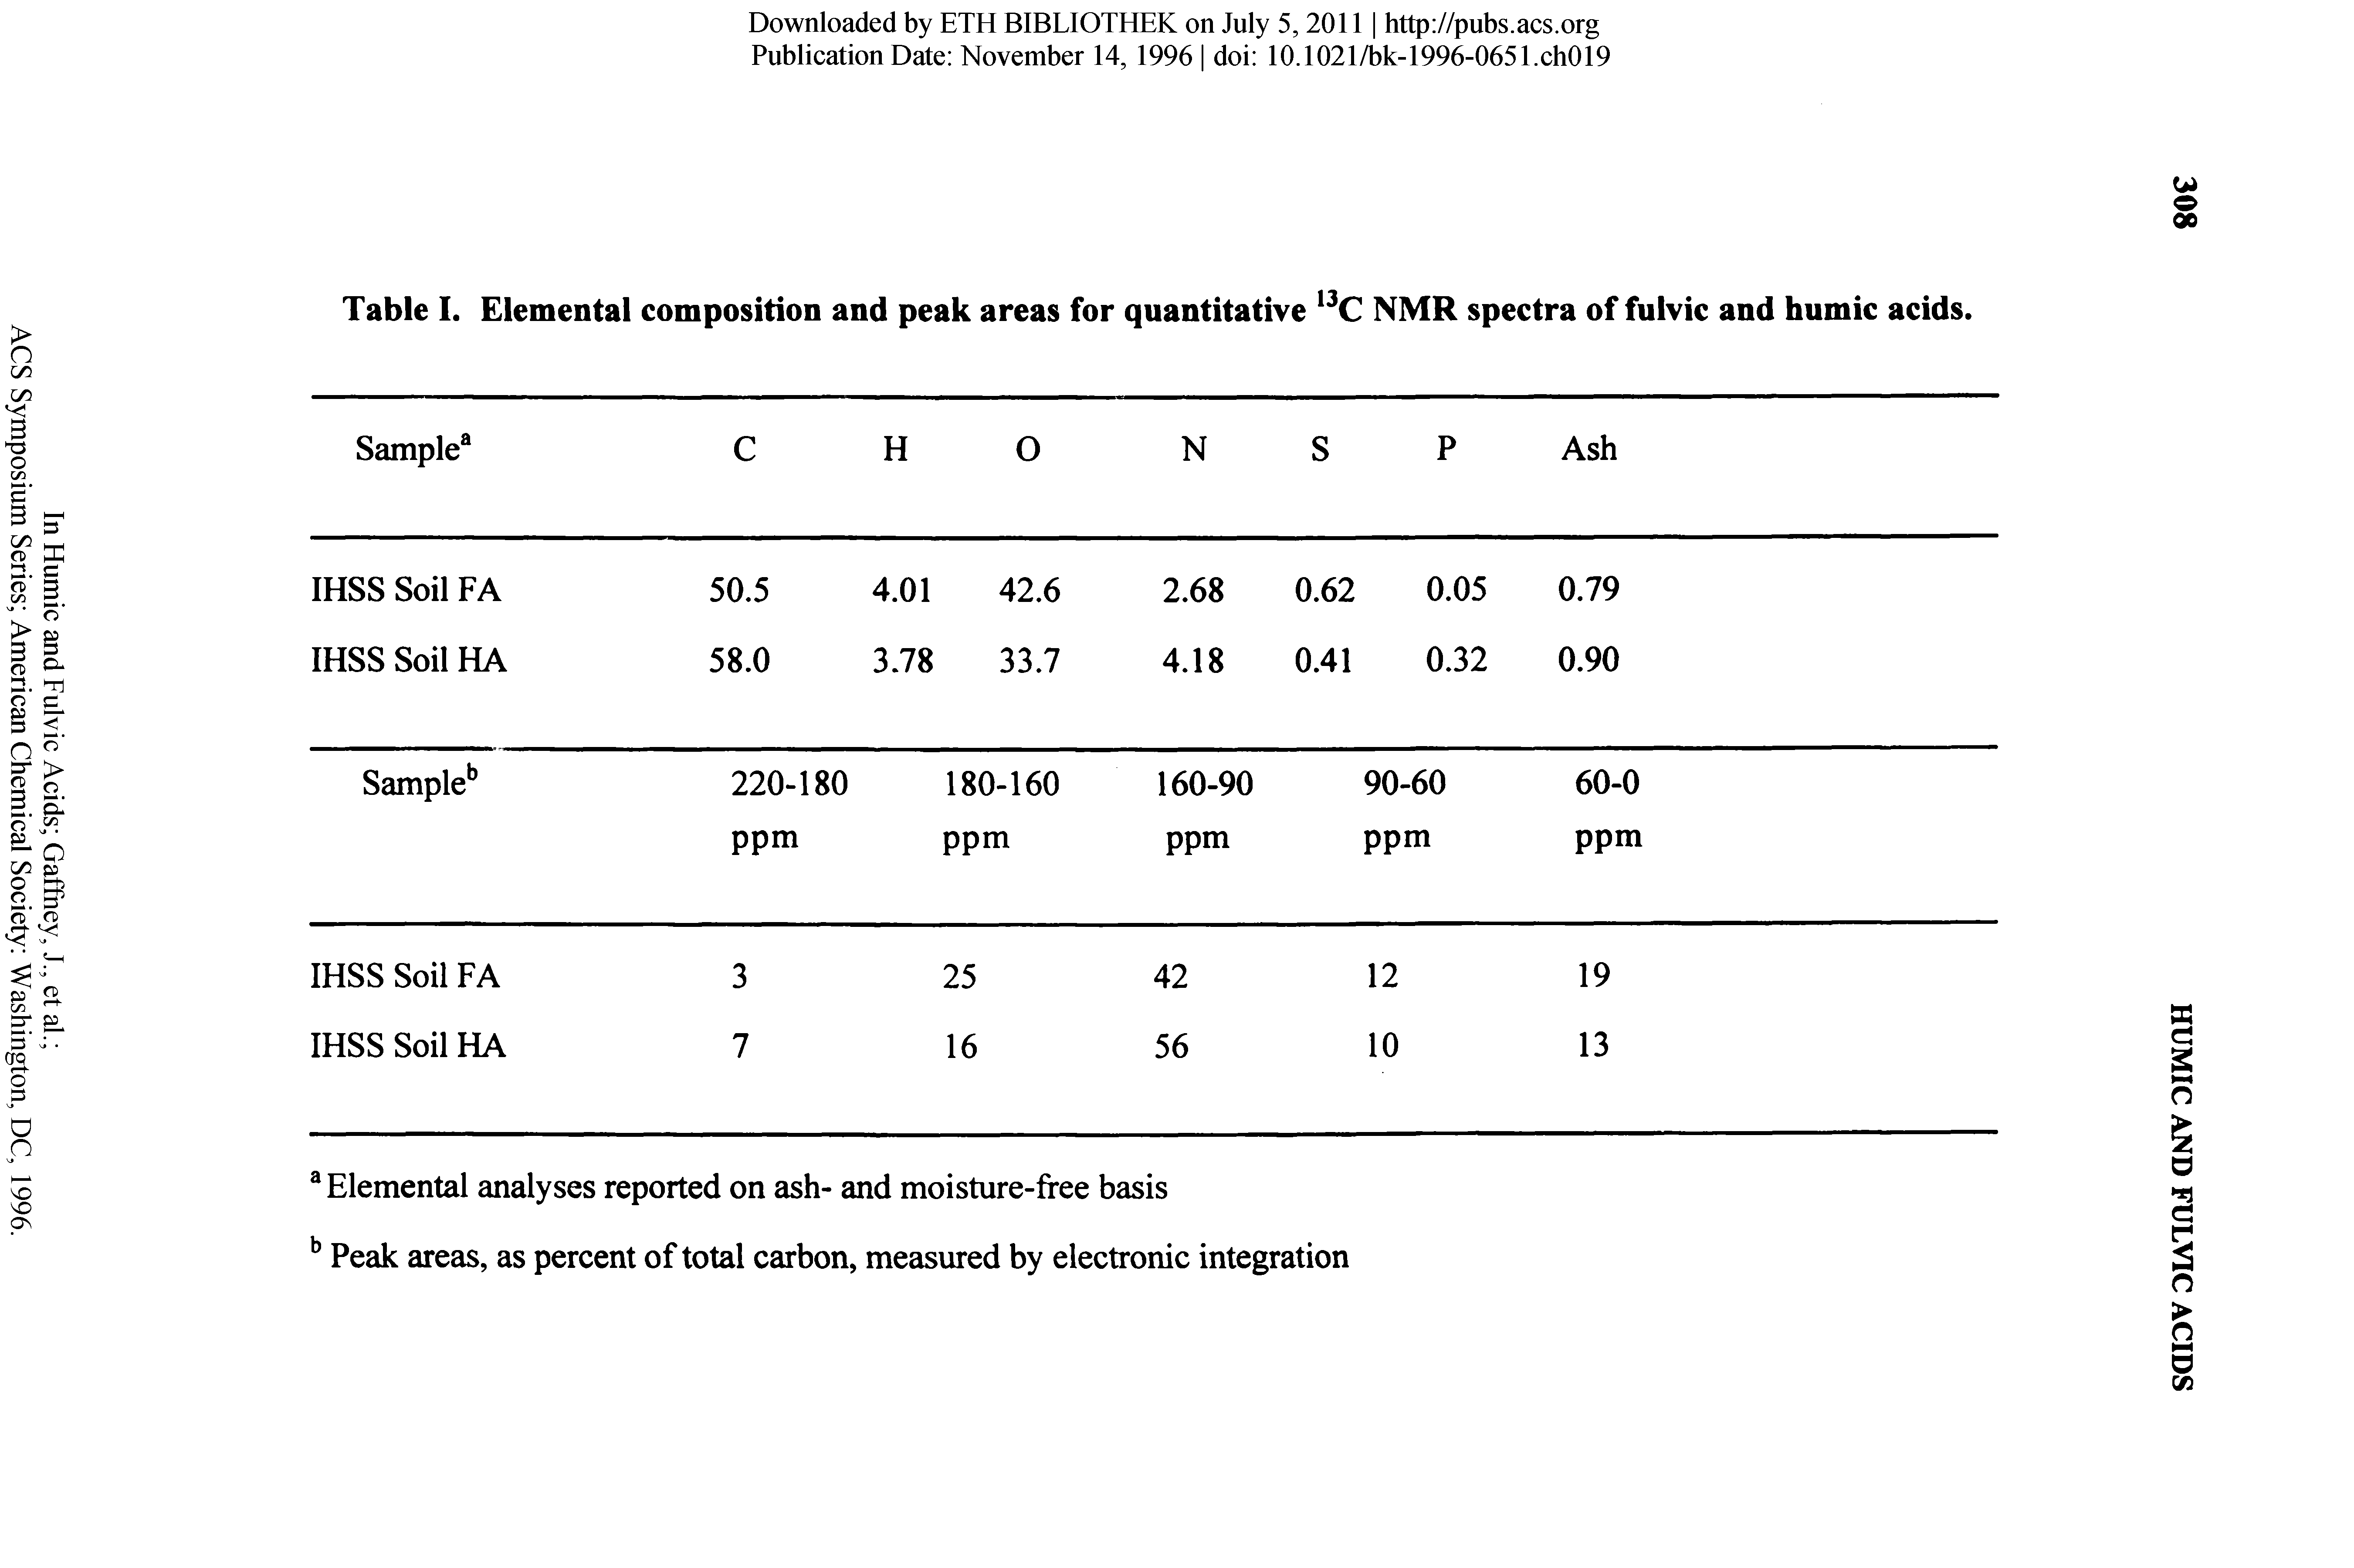 Table I. Elemental composition and peak areas for quantitative NMR spectra of fulvic and humic acids.